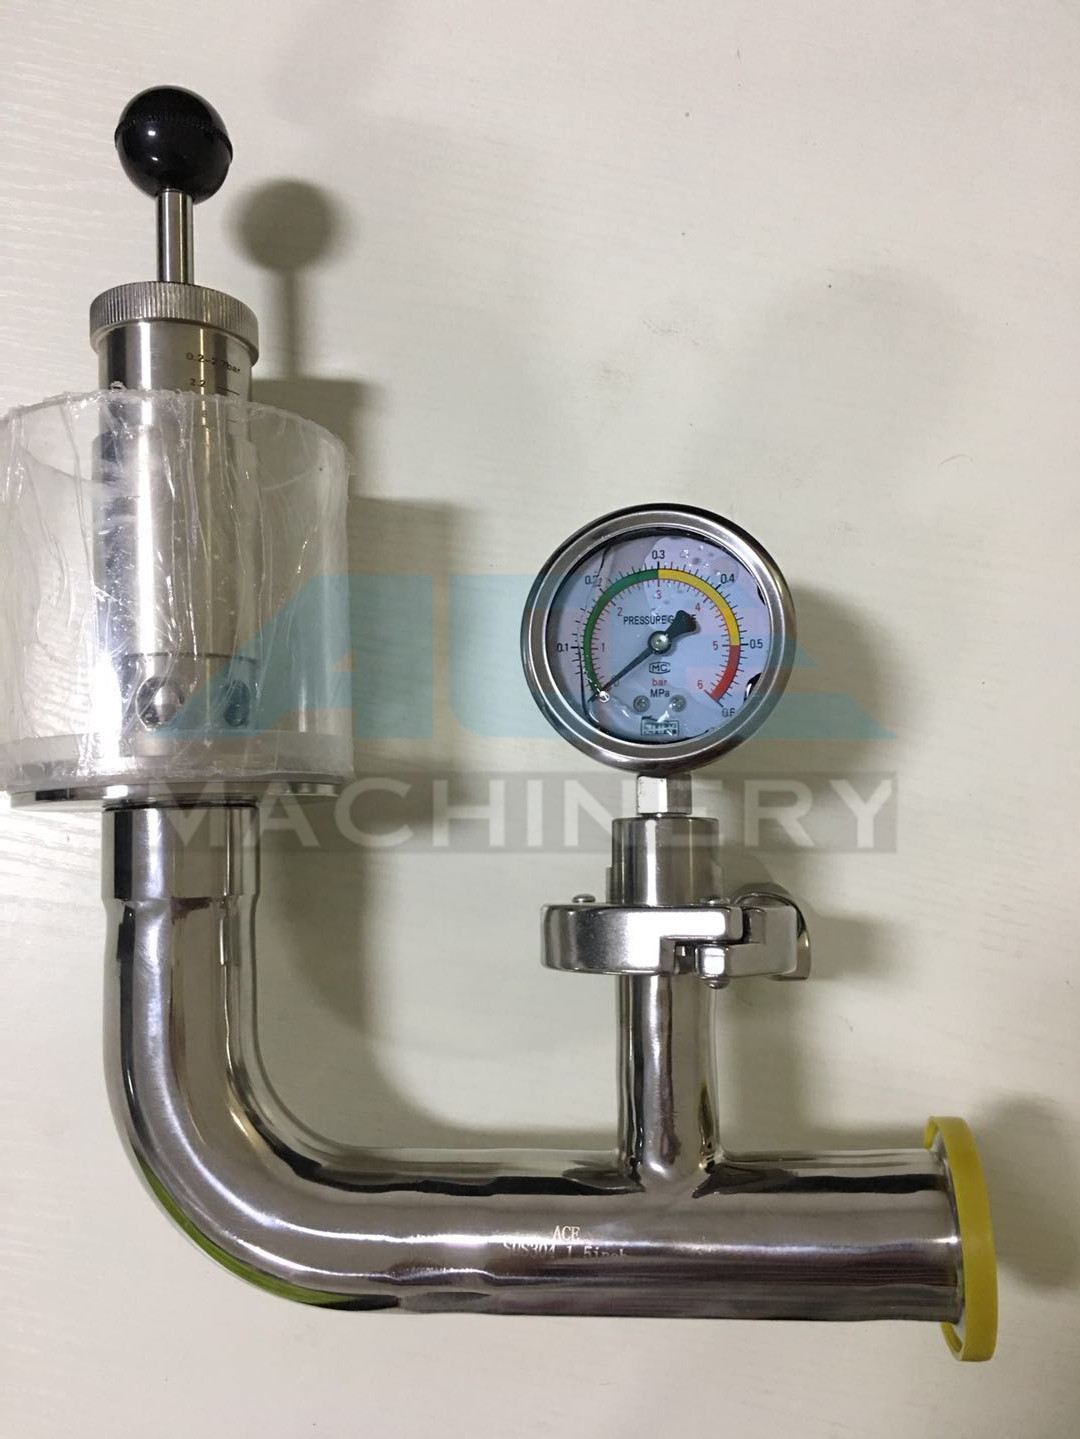 Quality Stainless Steel Spring Pressure Relief Valve for Tank  Relief Valve with Manometer for Fermentation Tank for sale